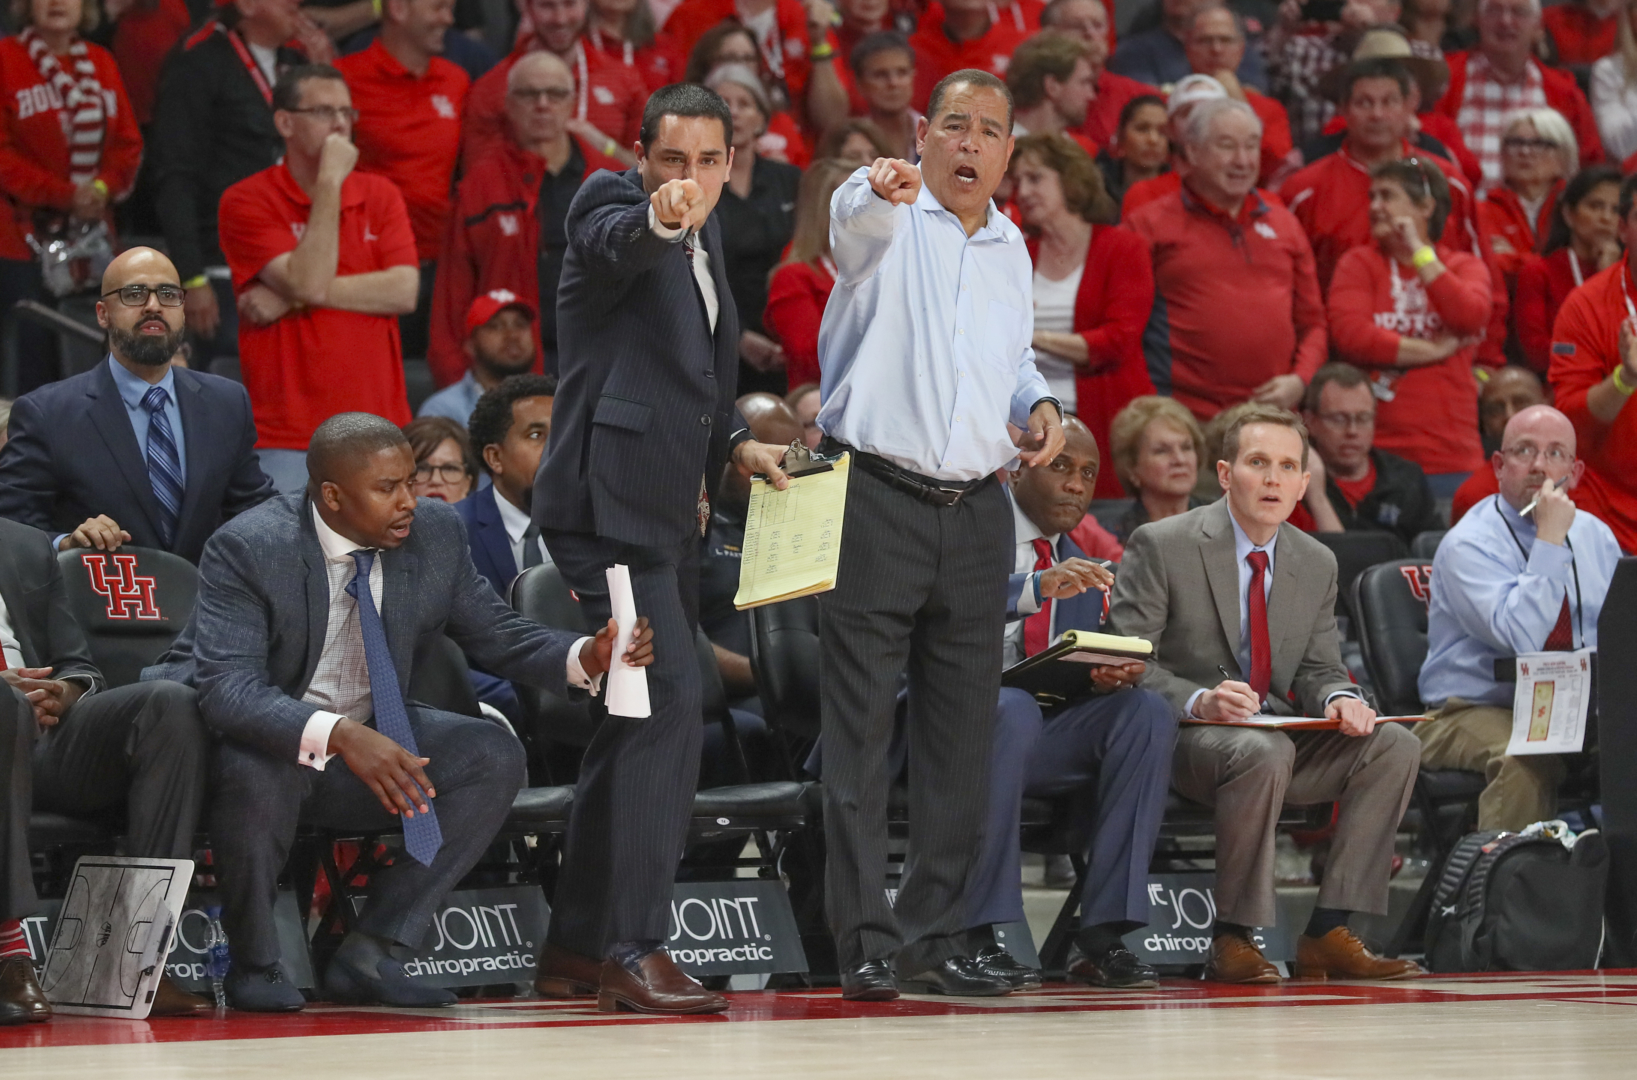 Kelvin and Kellen Sampson are the faces of a UH coaching staff that has statistically done one of the best jobs in turning a program around and into national contenders over the past decade. | Courtesy of UH athletics